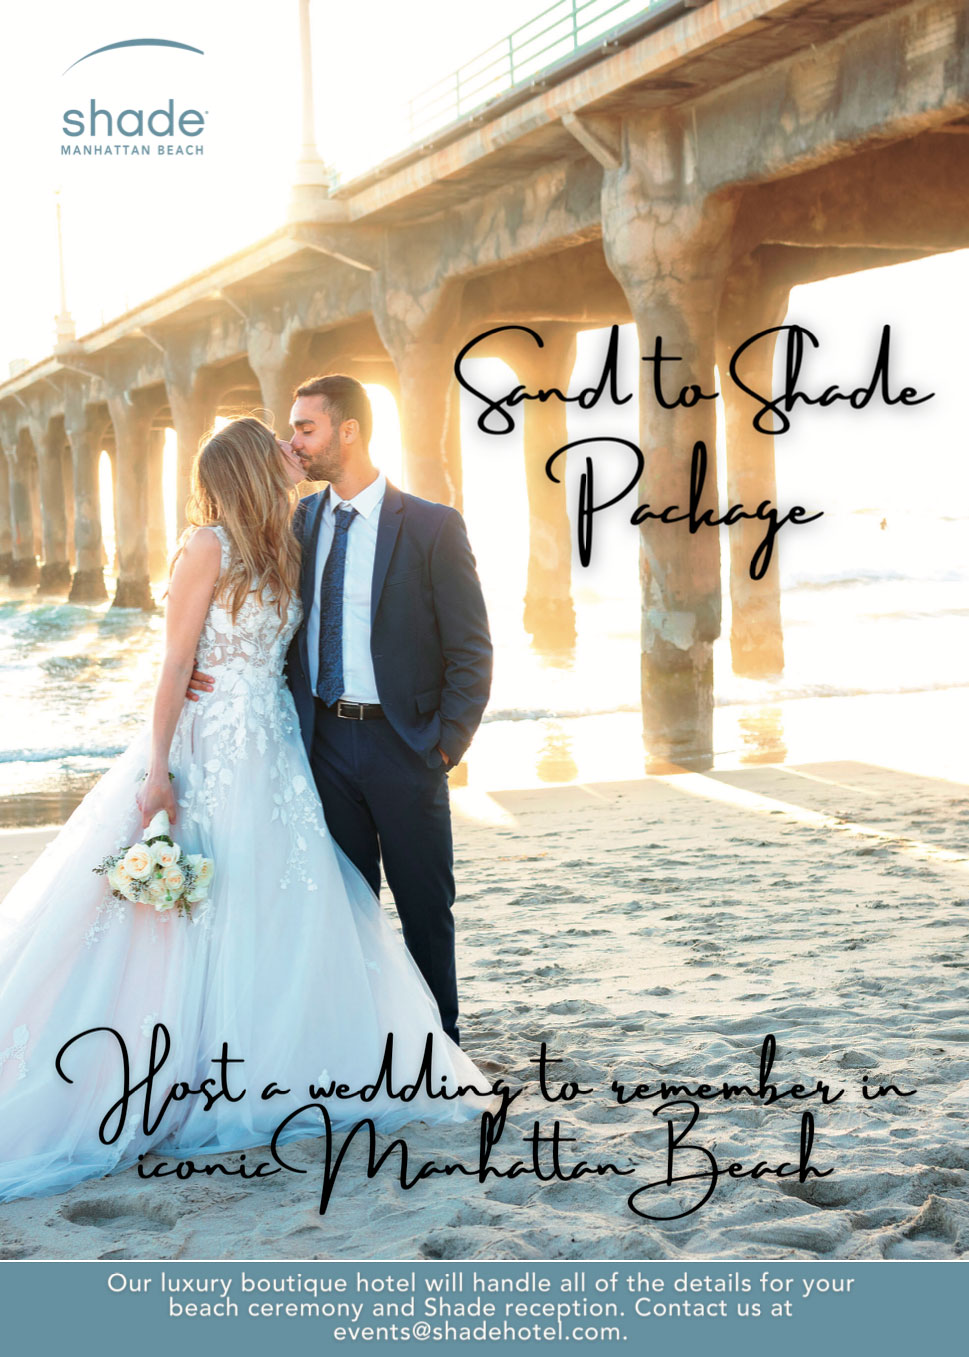 Sand to Shade Weddings promotional poster